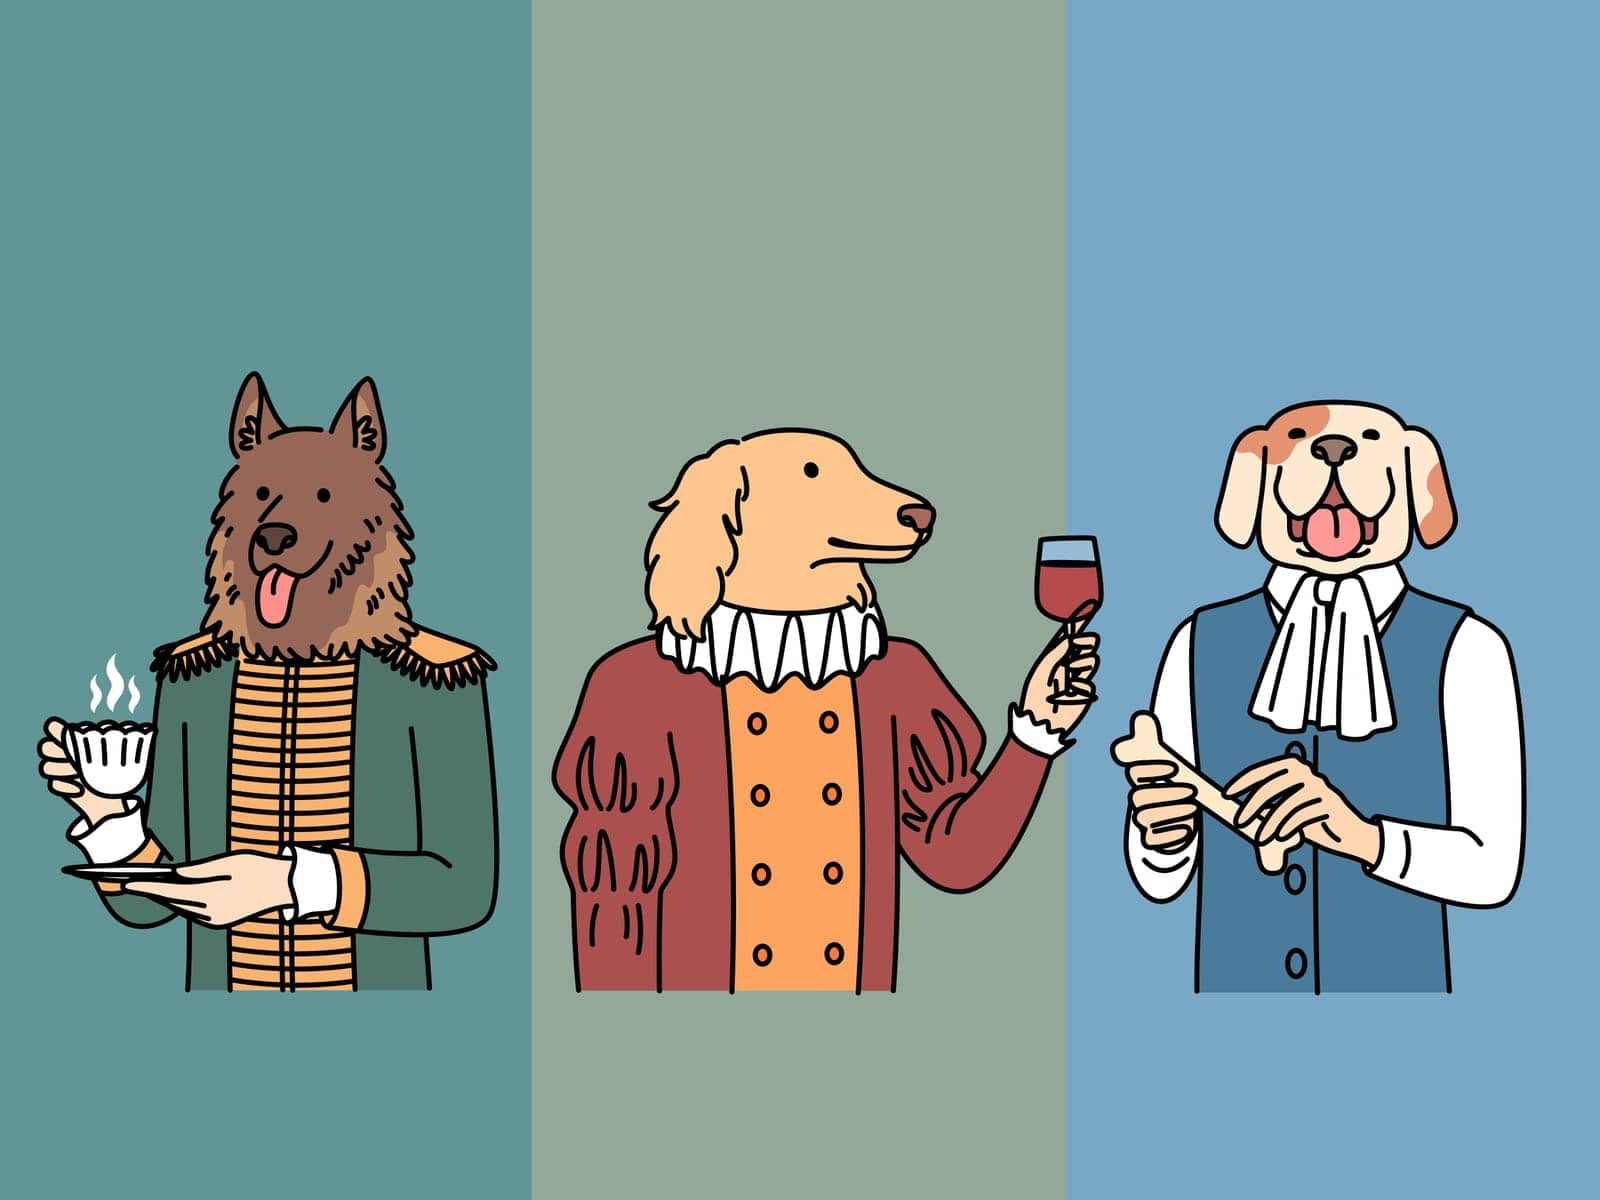 Dogs with body of people in clothes of lords and medieval kings hold mug of tea or glass of wine. Parody dogs in image of aristocrats from high society of 18th century dressed in vintage costumes